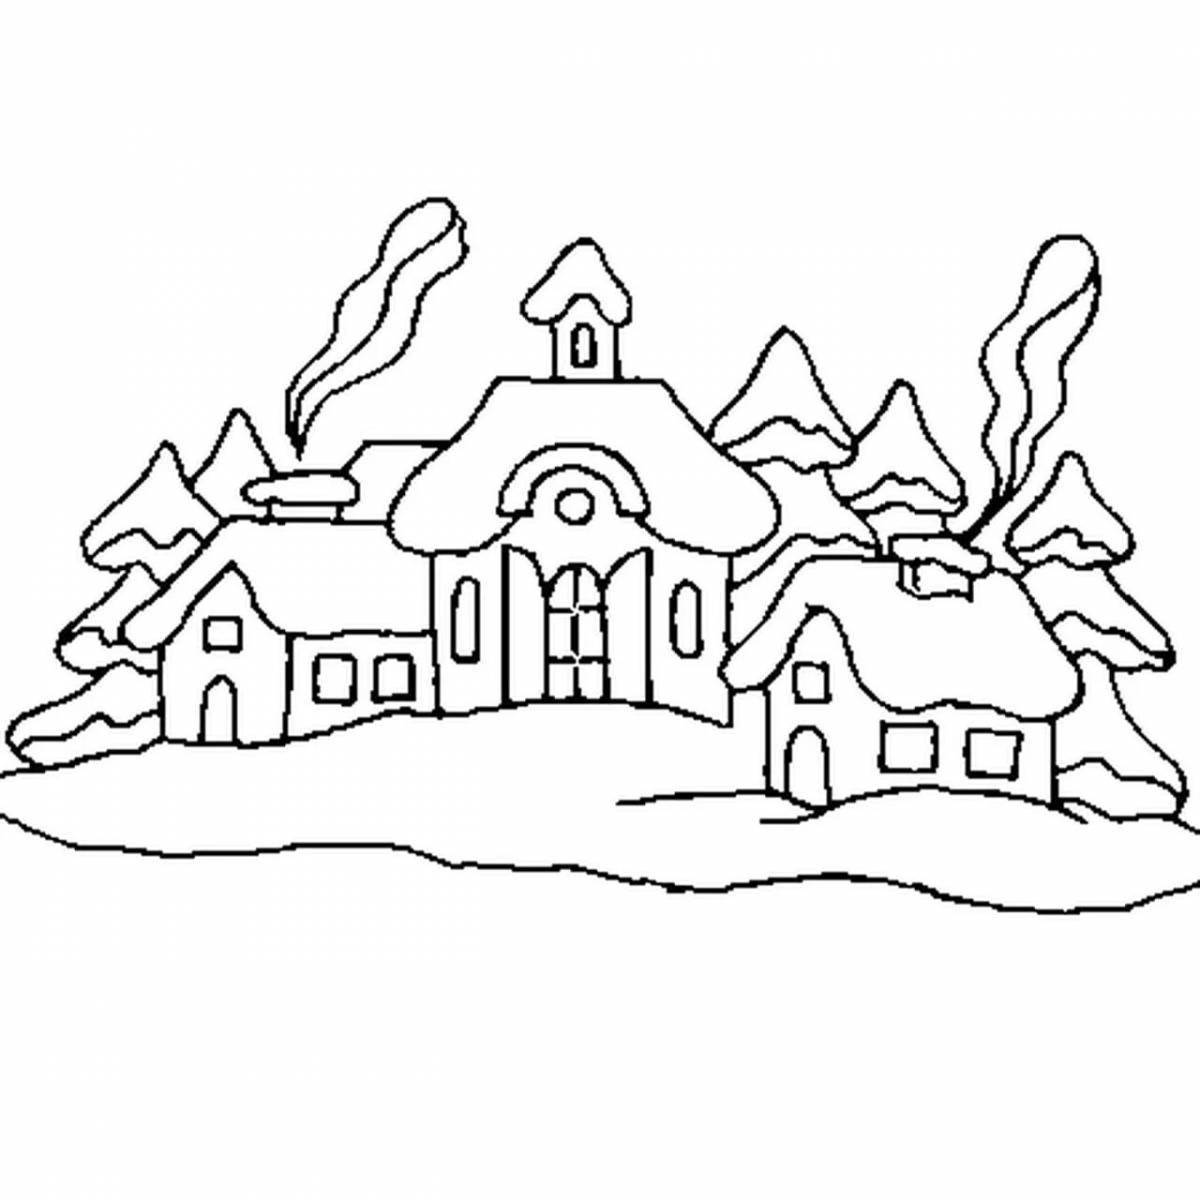 Beautiful village in winter coloring book